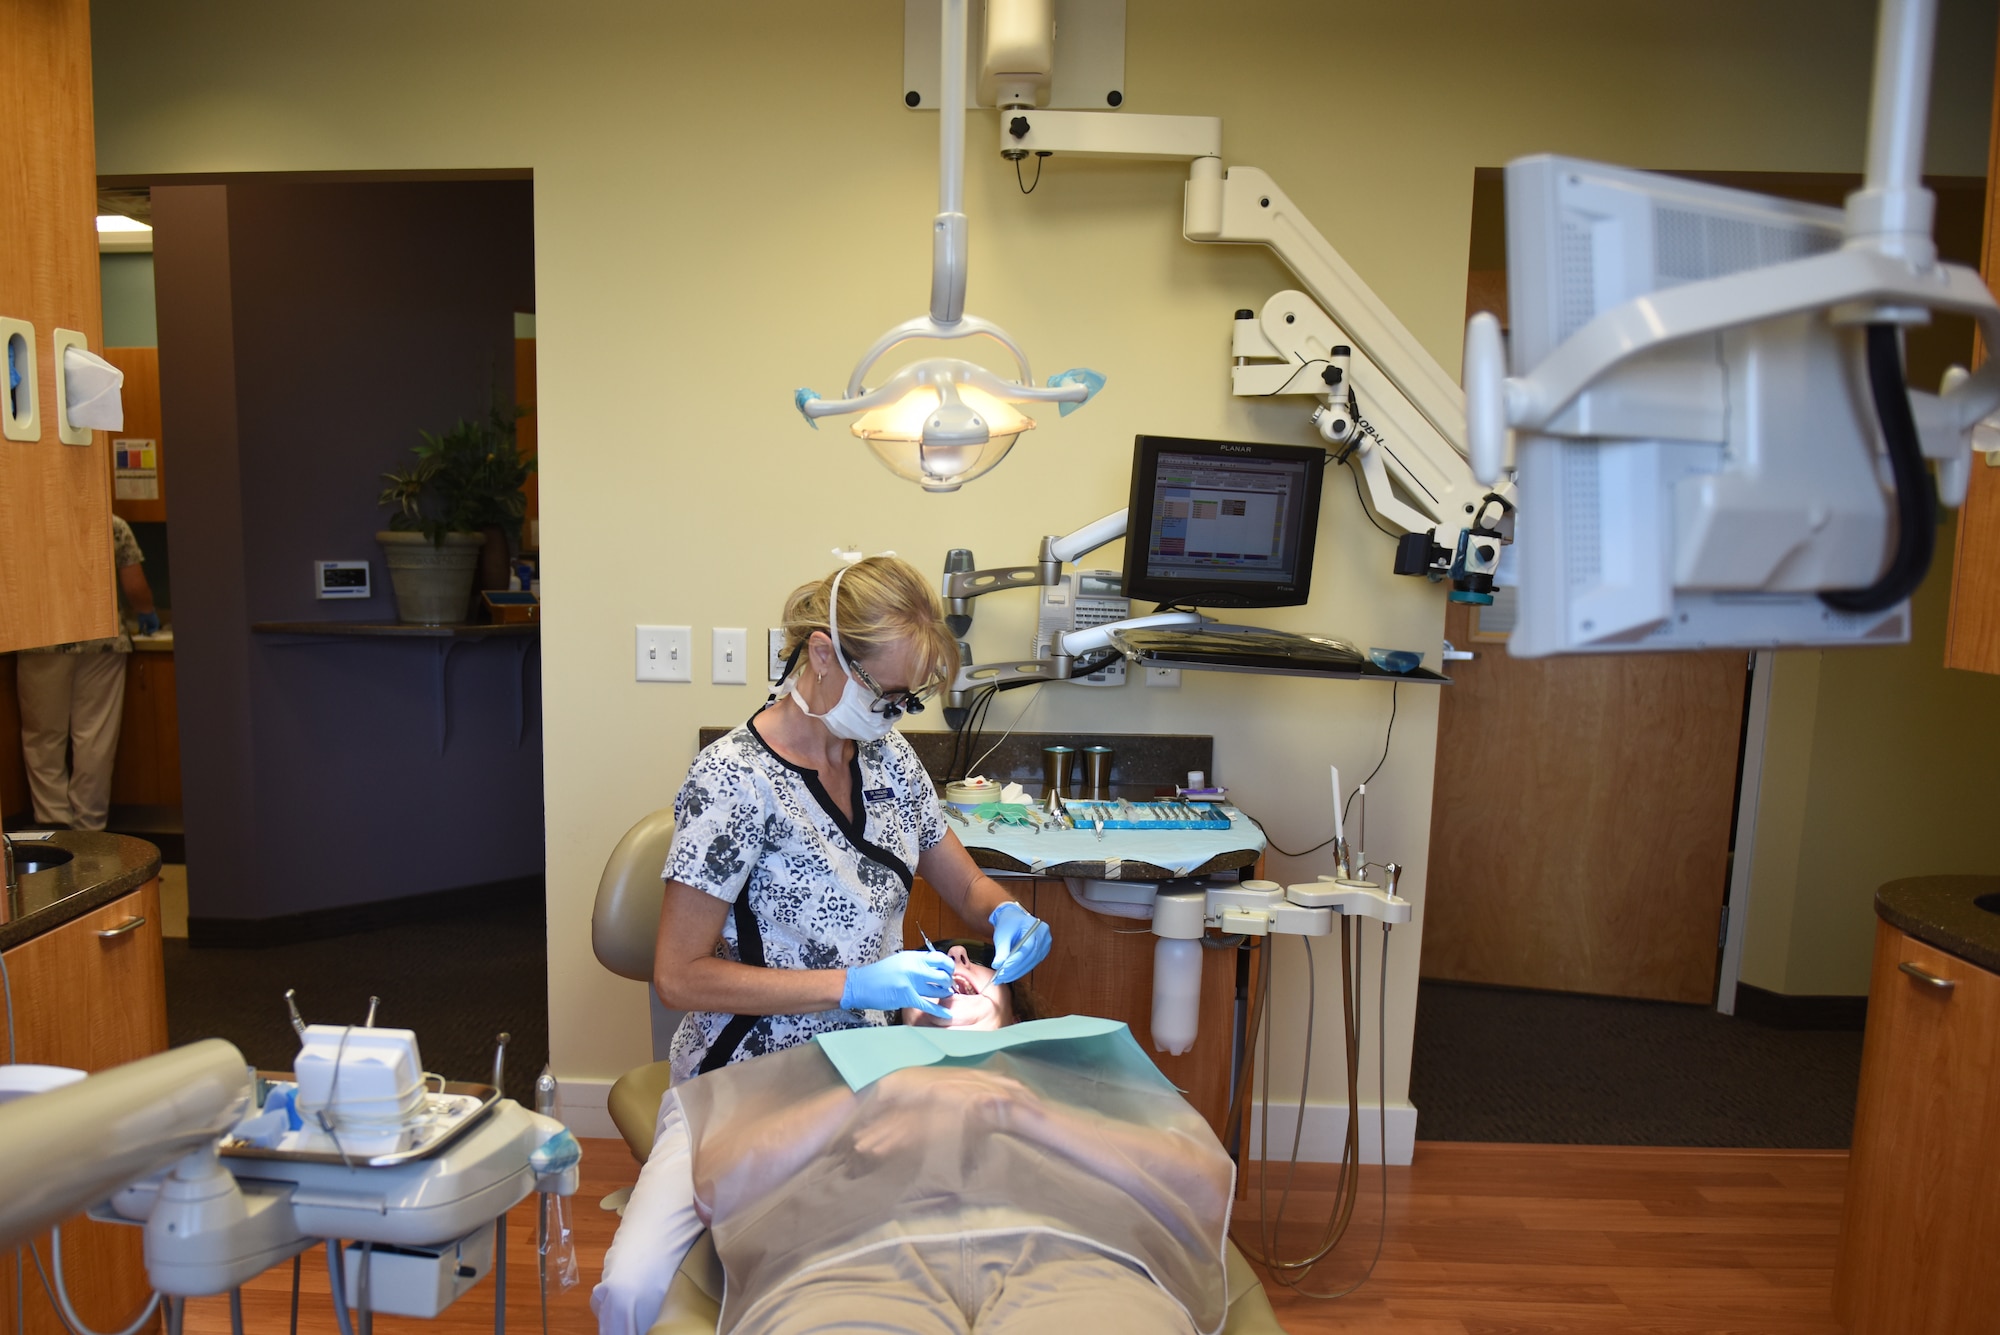 Dr. Nicole Yingling, endodontist and owner of Mason-Dixon Endodontics, Chambersburg, Pennsylvania, examines a patient’s mouth for the reason that they are having mouth pain Oct. 1, 2018. Yingling began her career as a general dentist and later specialized in endodontics, which focuses on the treatment of root canals. Yingling served 11 years as an active duty dentist and after a 12-year break-in-service, enlisted into the 193rd Special Operations Medical Group, Middletown, Pennsylvania. (U.S. Air National Guard photo by Senior Airman Julia Sorber/Released)